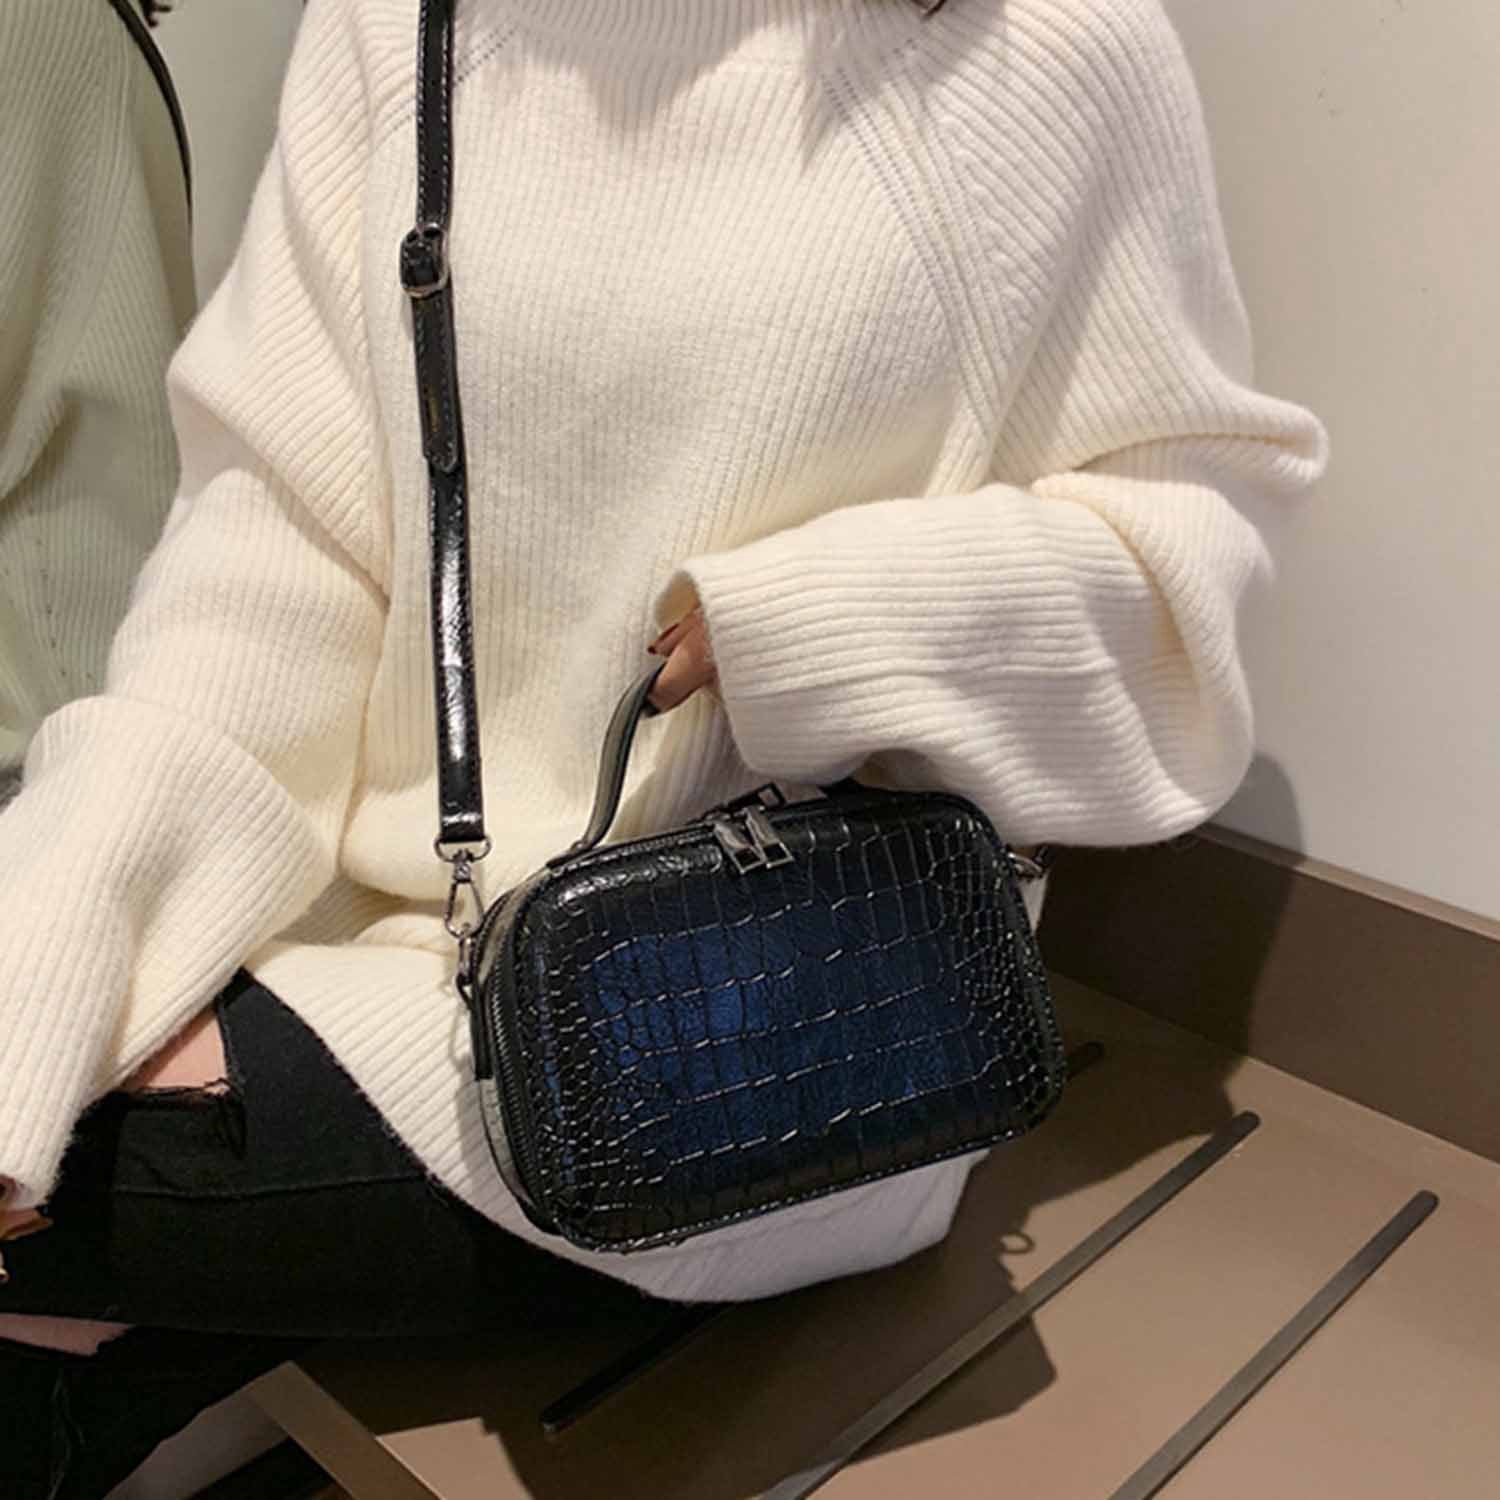 Stone Pattern Crossbody Bags For Women Fashion Small Solid Colors Shoulder Bag Female Handbags And Purses With Handle(Bla - ebowsos